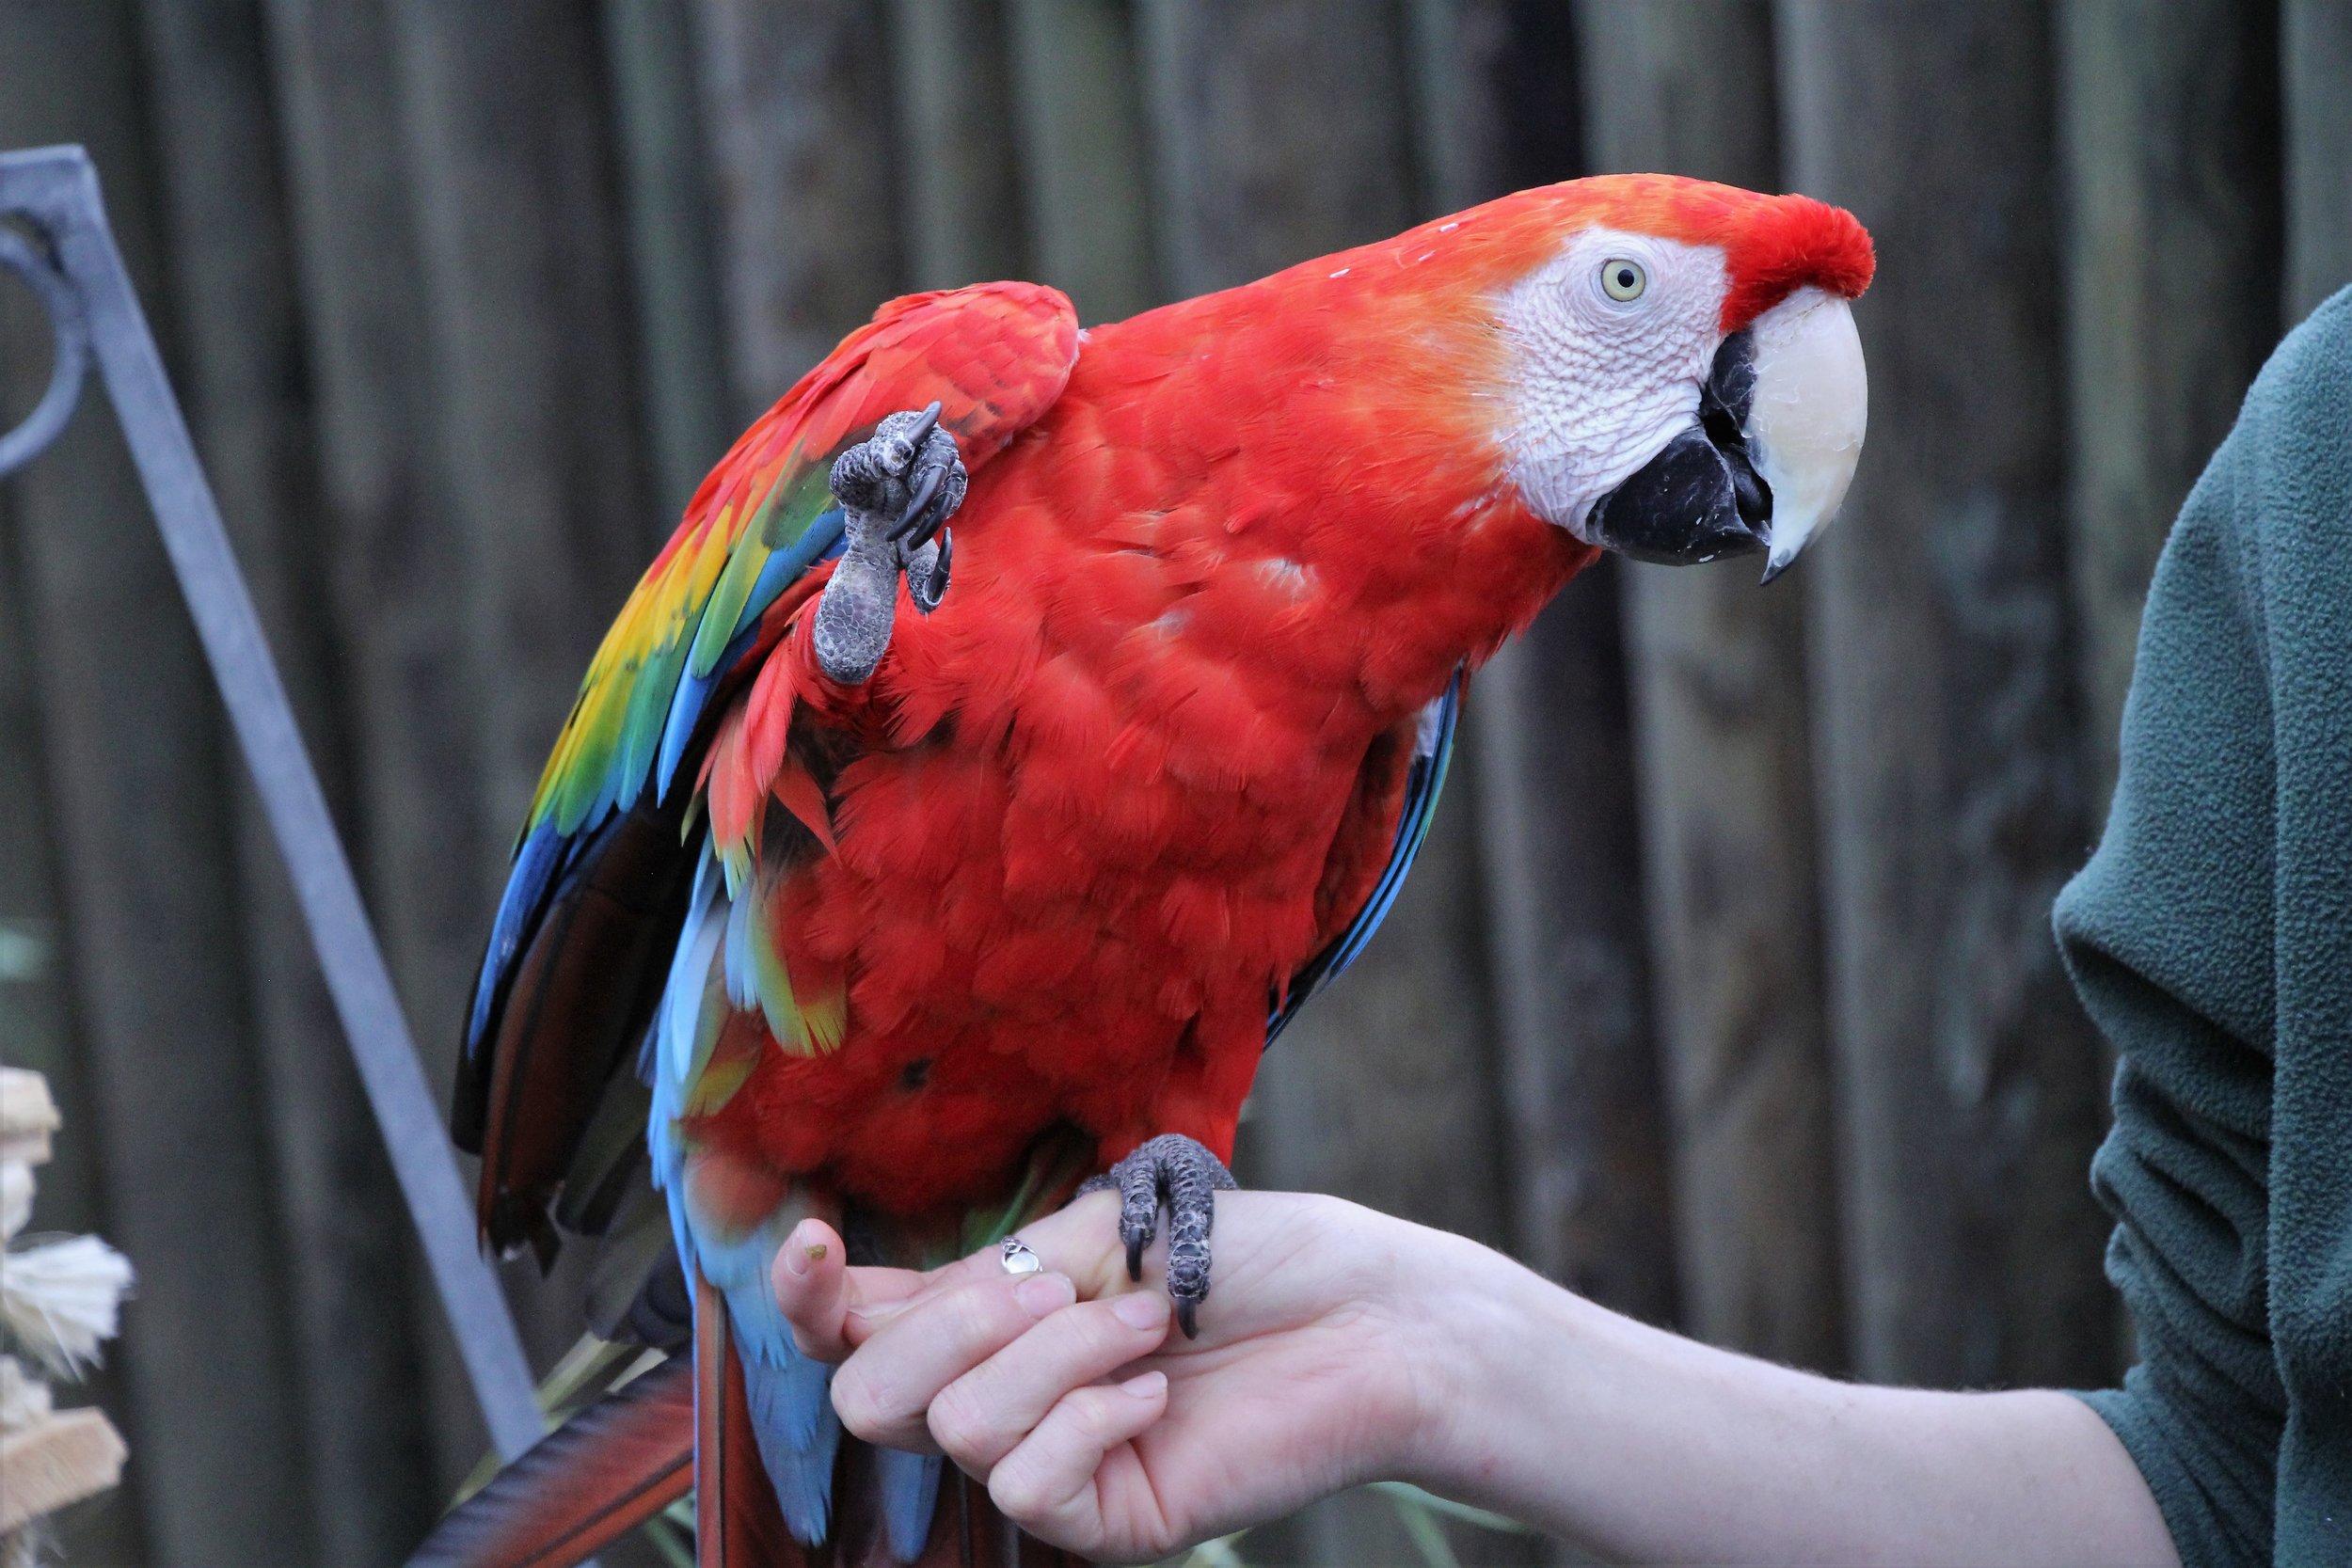 Clifford the Scarlet Macaw